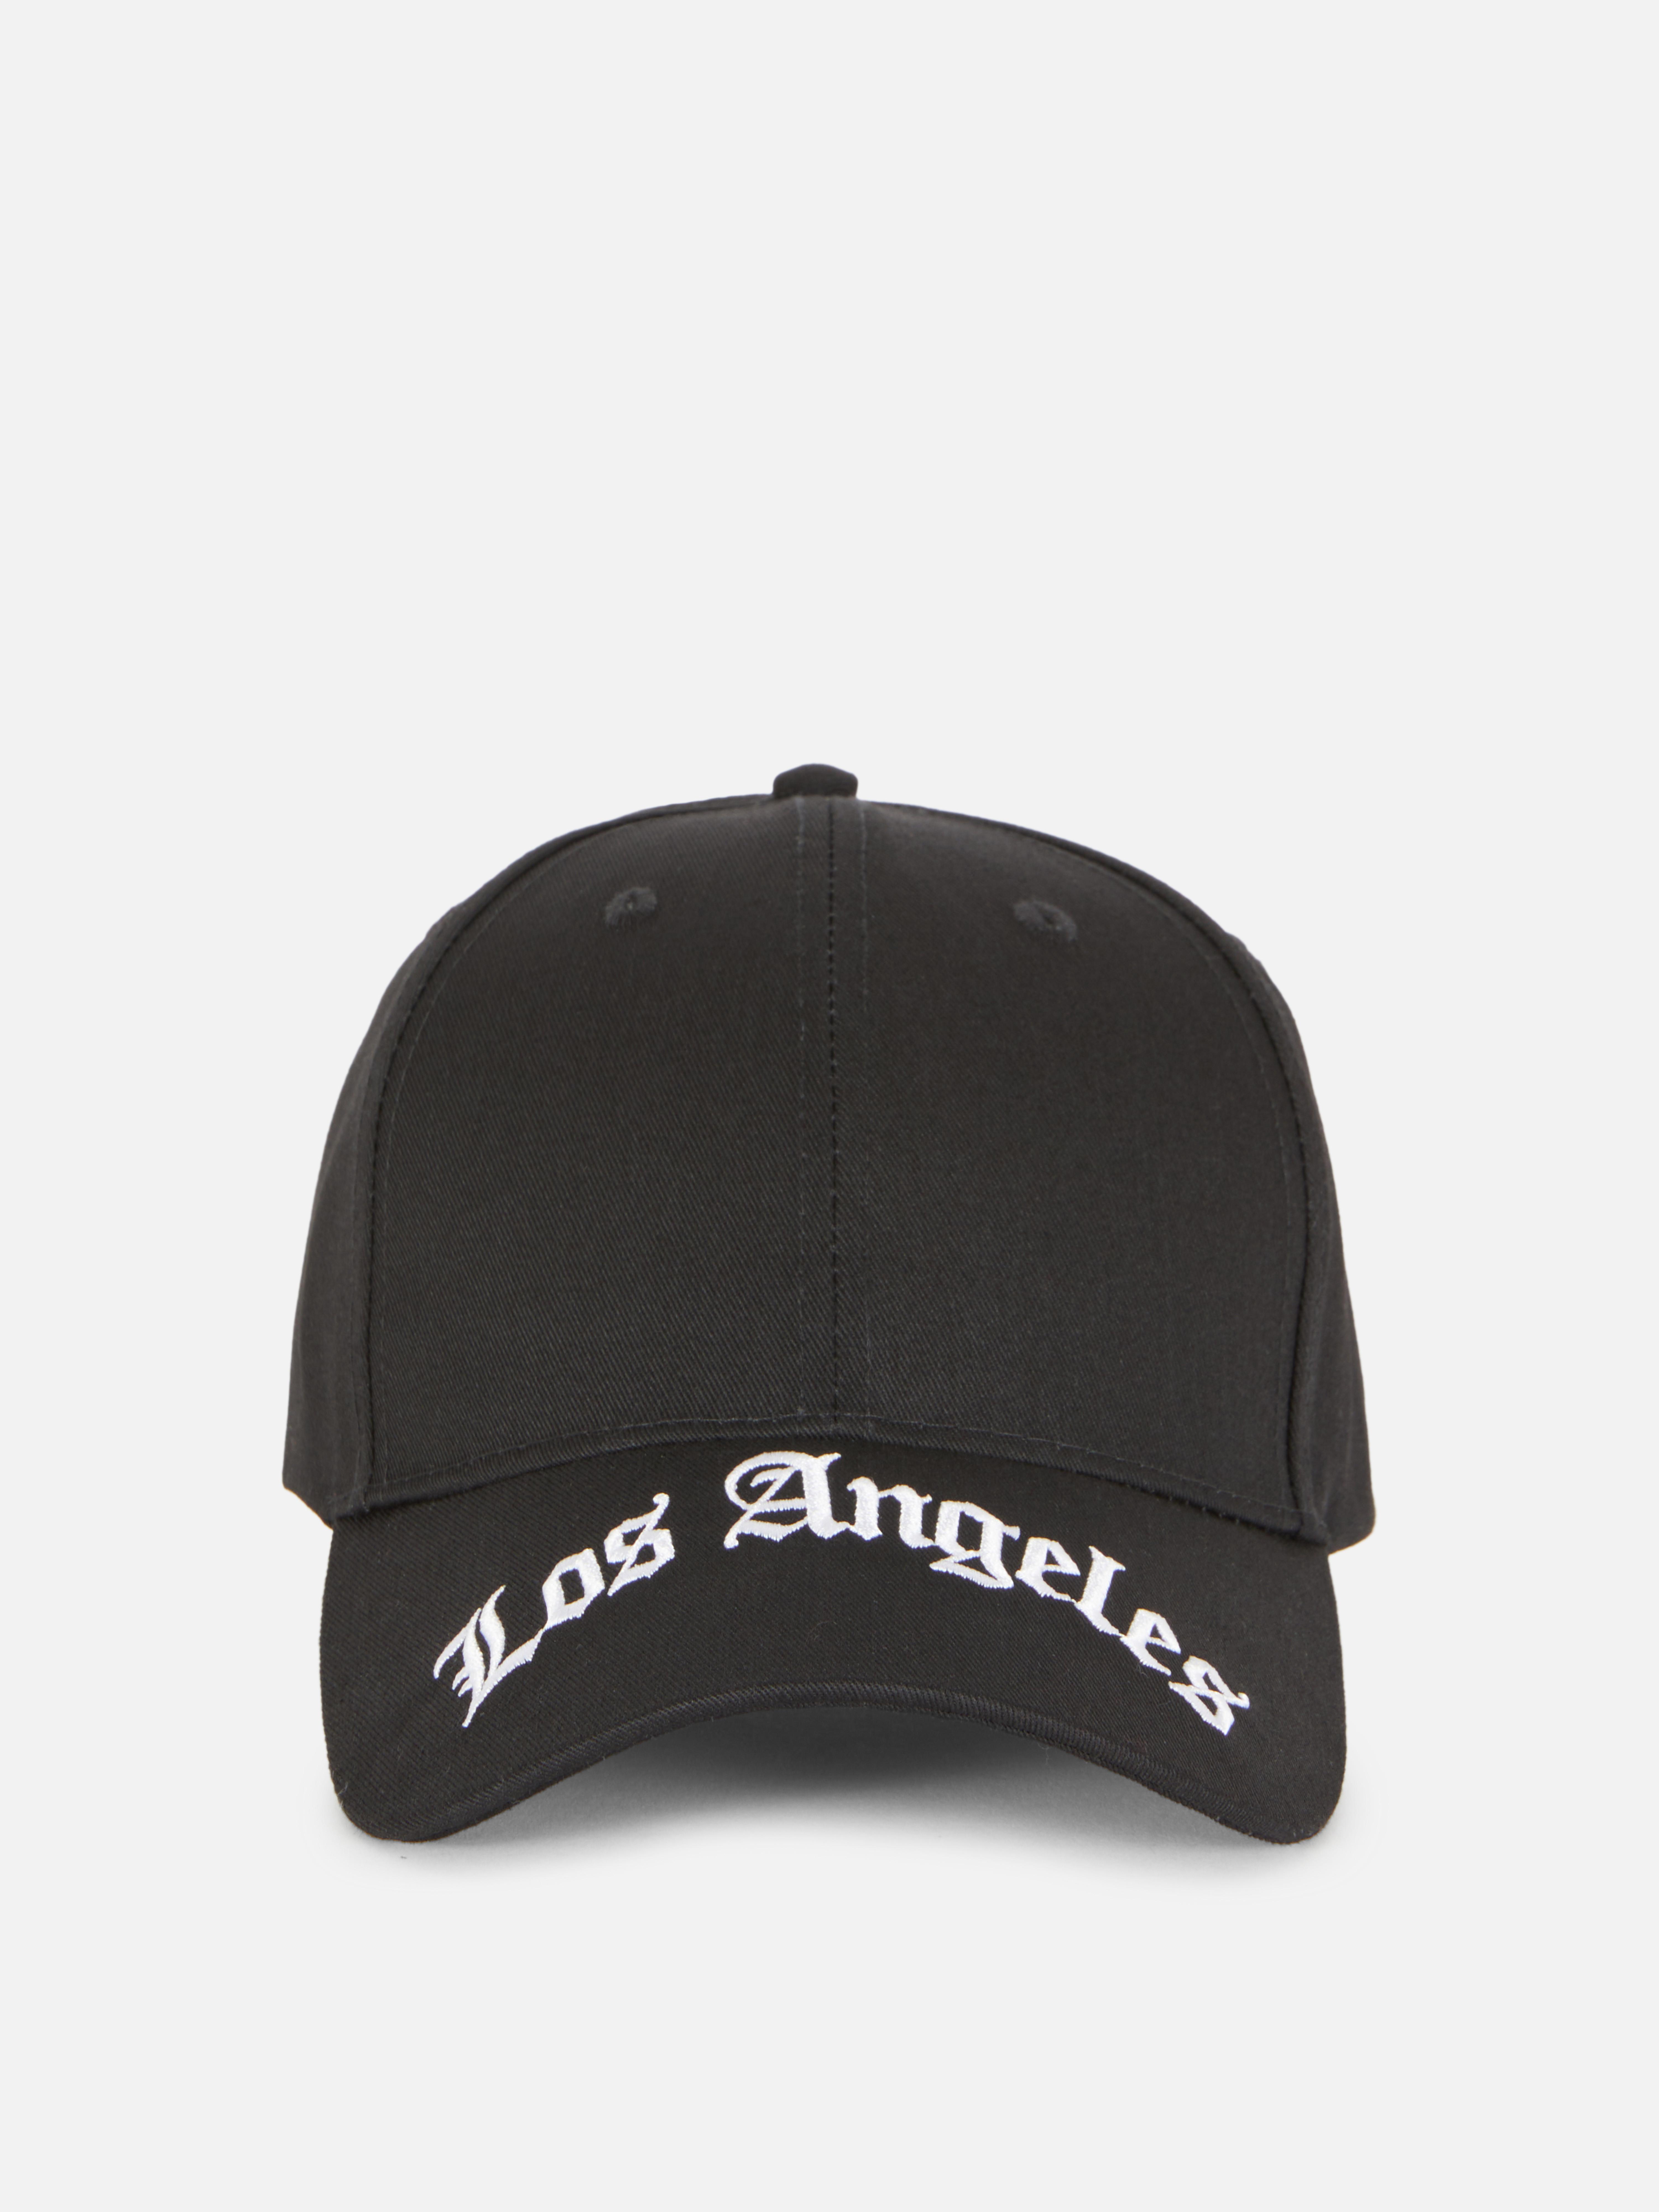 Los Angeles Embroidered Baseball Cap